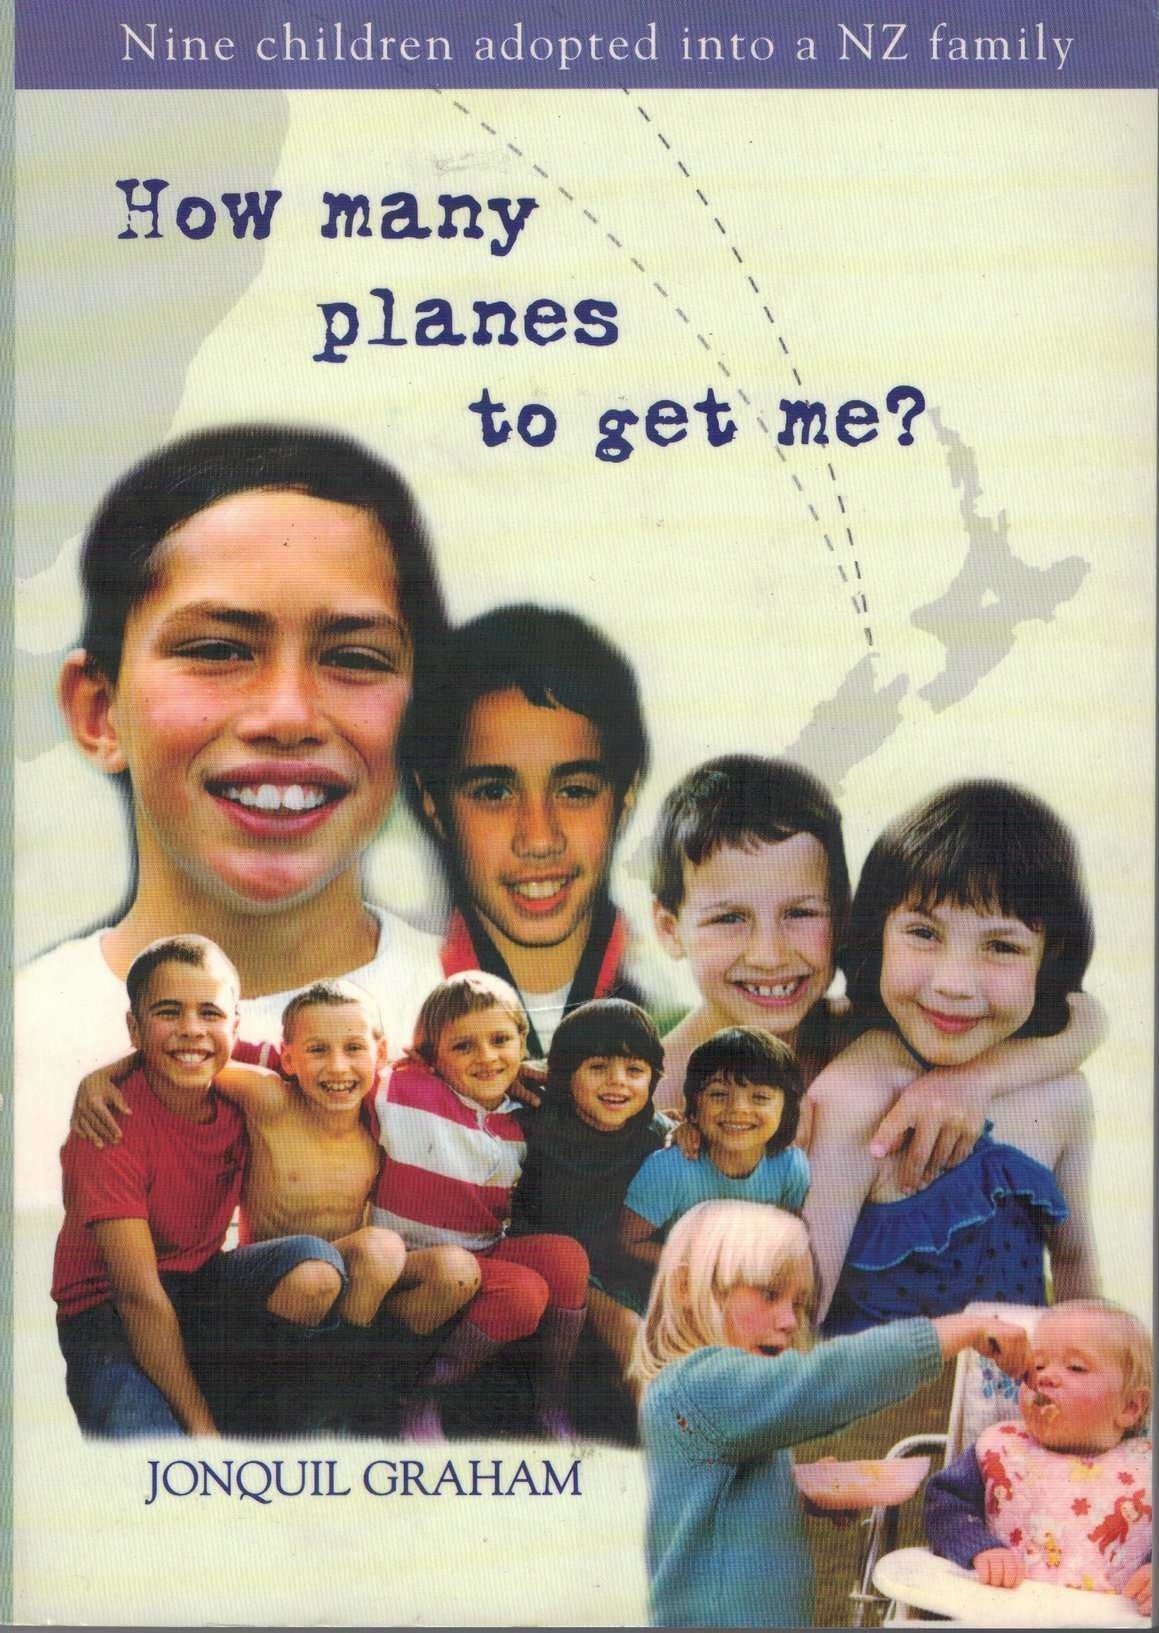 FREE: How Many Planes to get me?  Nine children adopted into a NZ family by Jonquil Graham